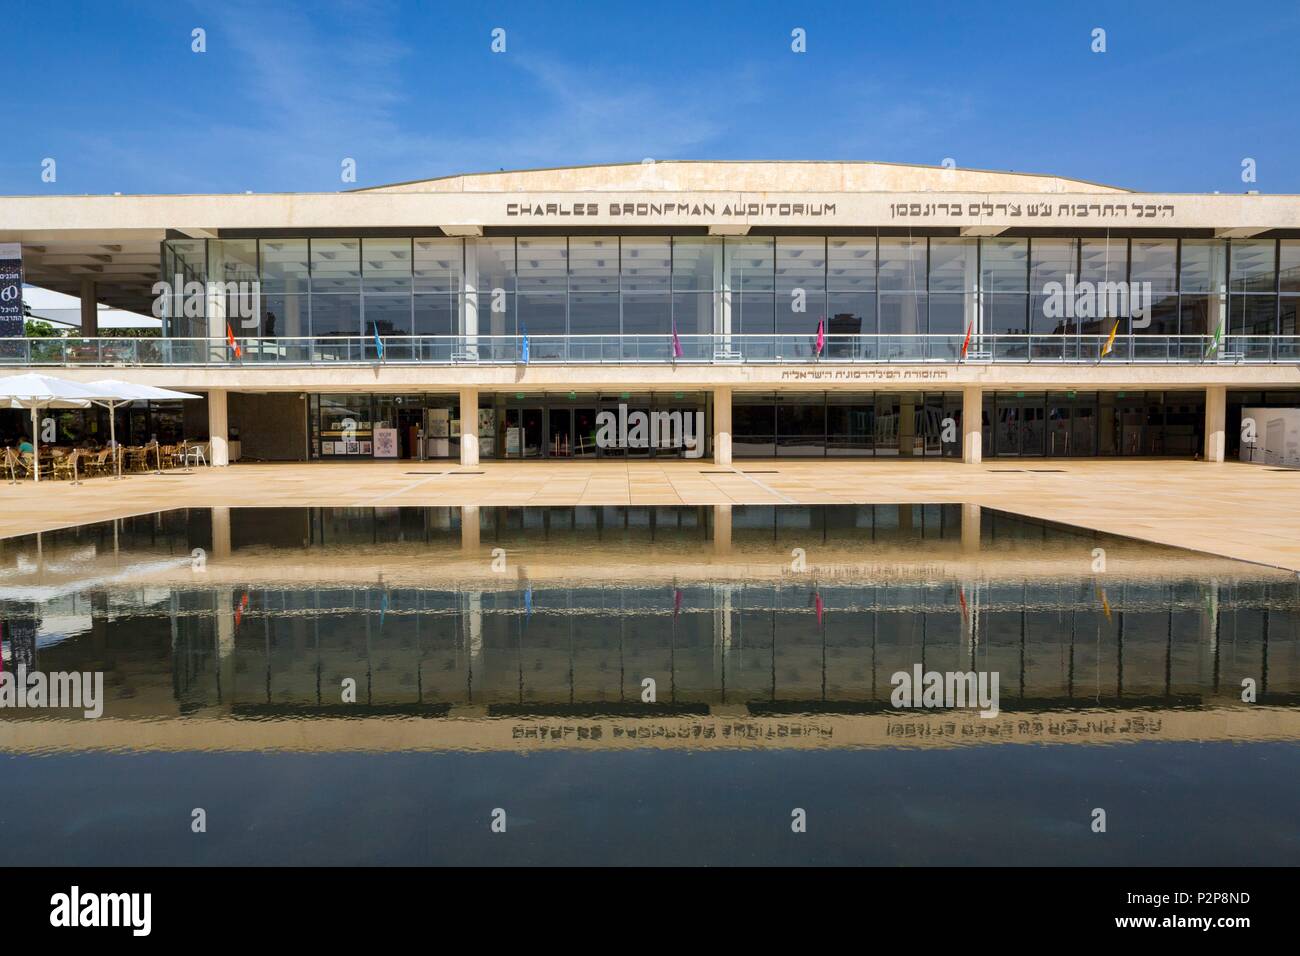 Israel, Tel Aviv-Jaffa, the city center, Habima Square, the cultural center Charles Bronfman Auditorium reflecting in a water basin Stock Photo